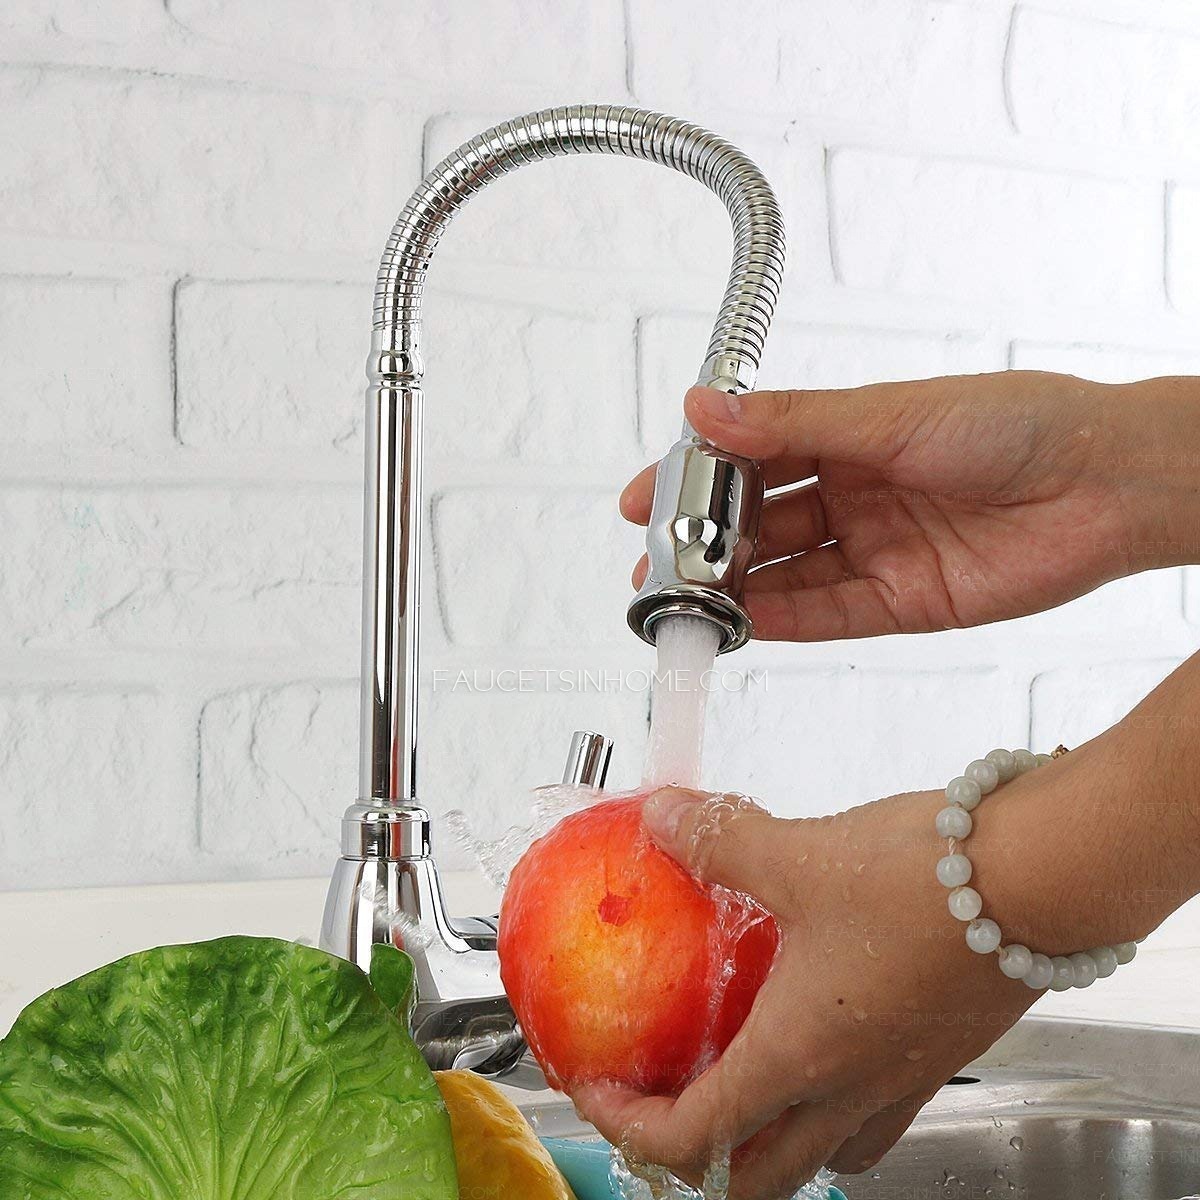 Pull Down Commerical Cold Water Mixed 360 Gegree Single Handle Kitchen Faucet 